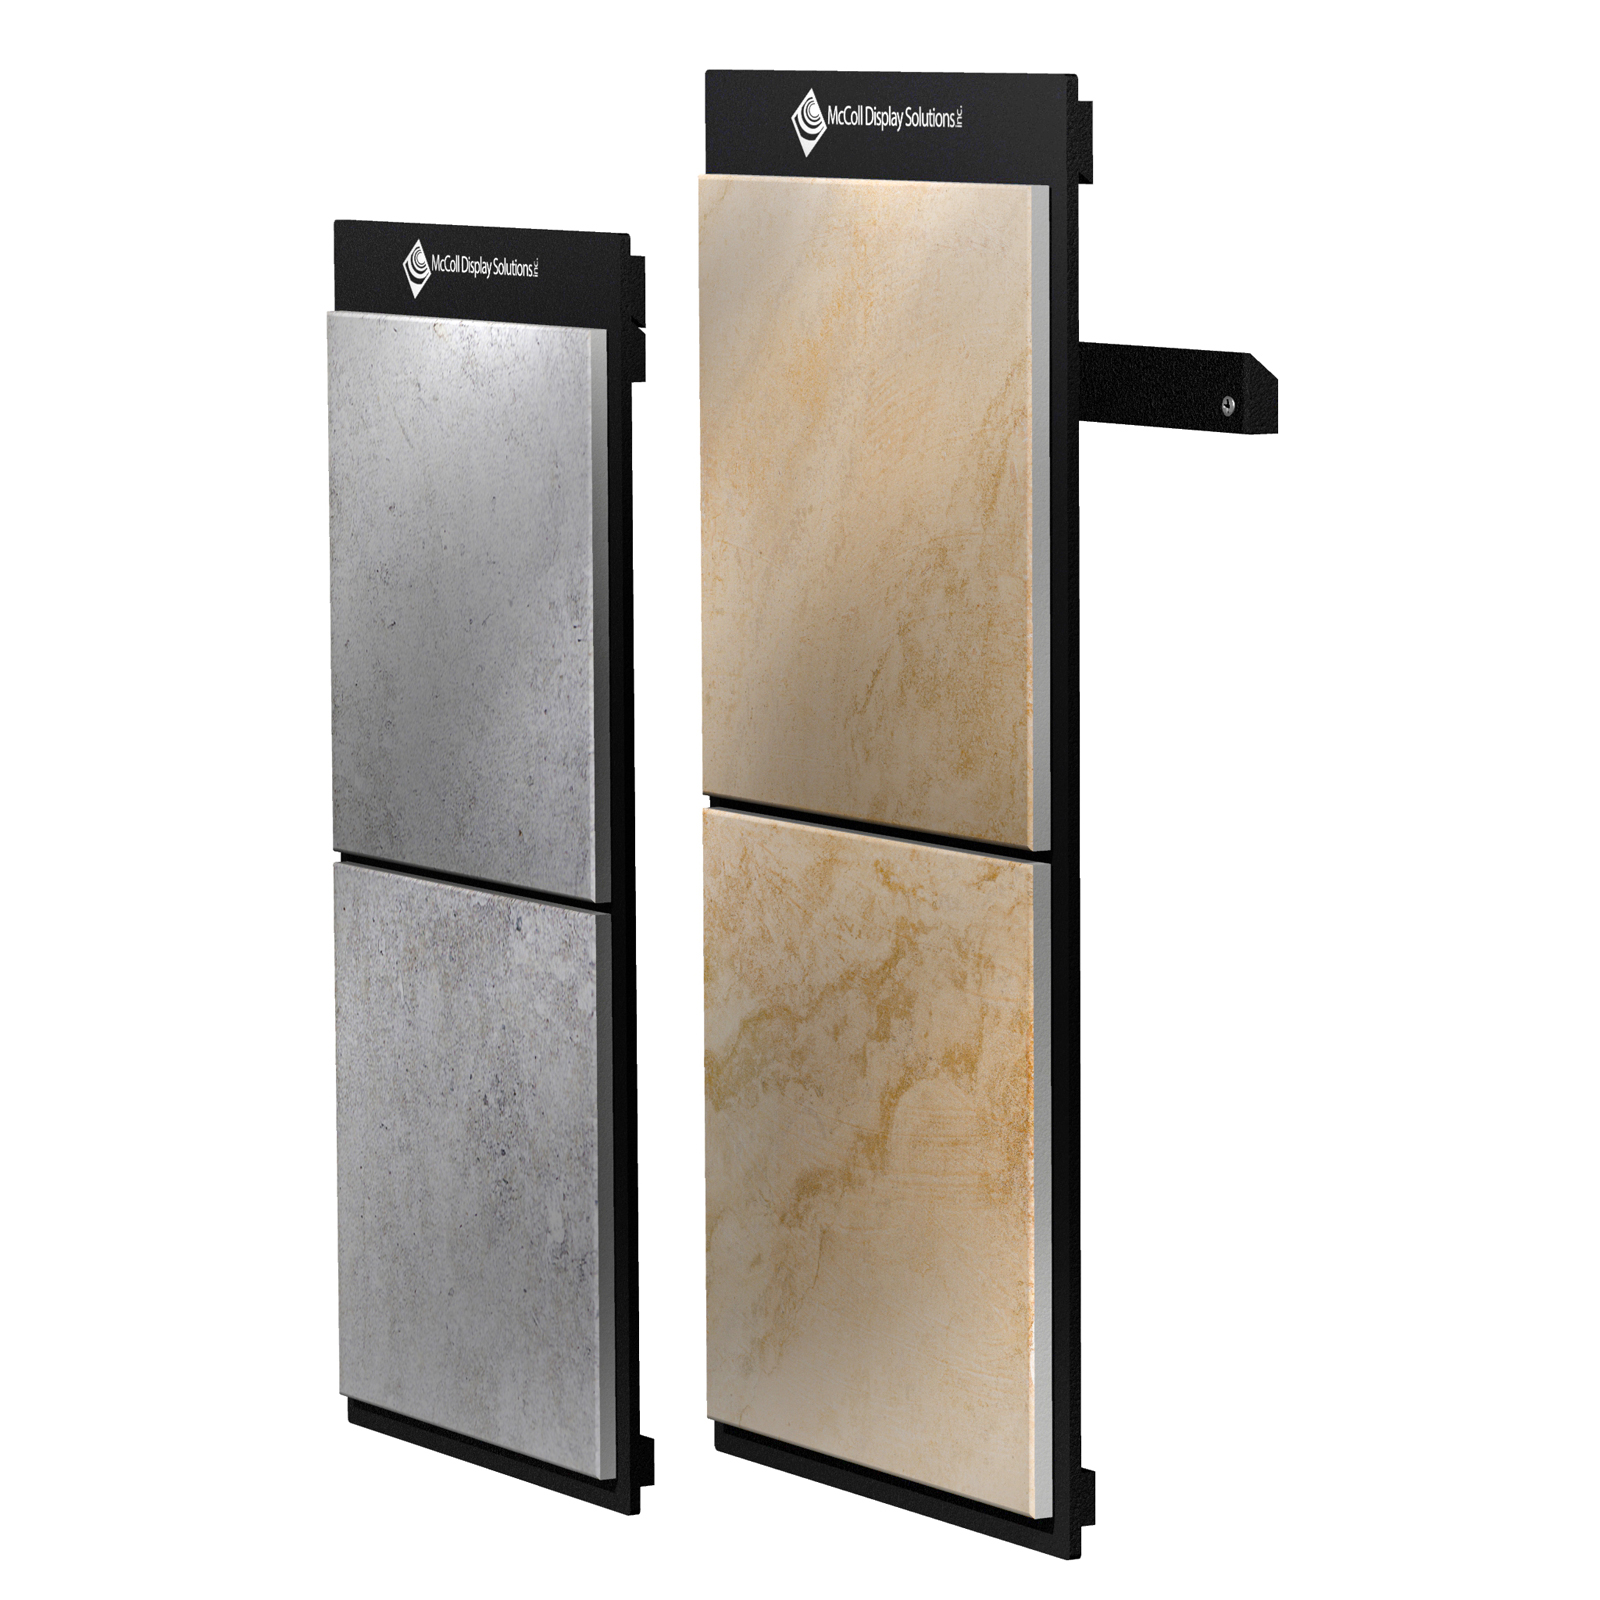 Customize this Cleat Board Wall Hanging Sample Display System MDF Board in Your Choice of Colors with Optional Screen Printed or Full Color Logo to Show Ceramic Tile Stone Mosaic Listello Deco Hardwood Flooring